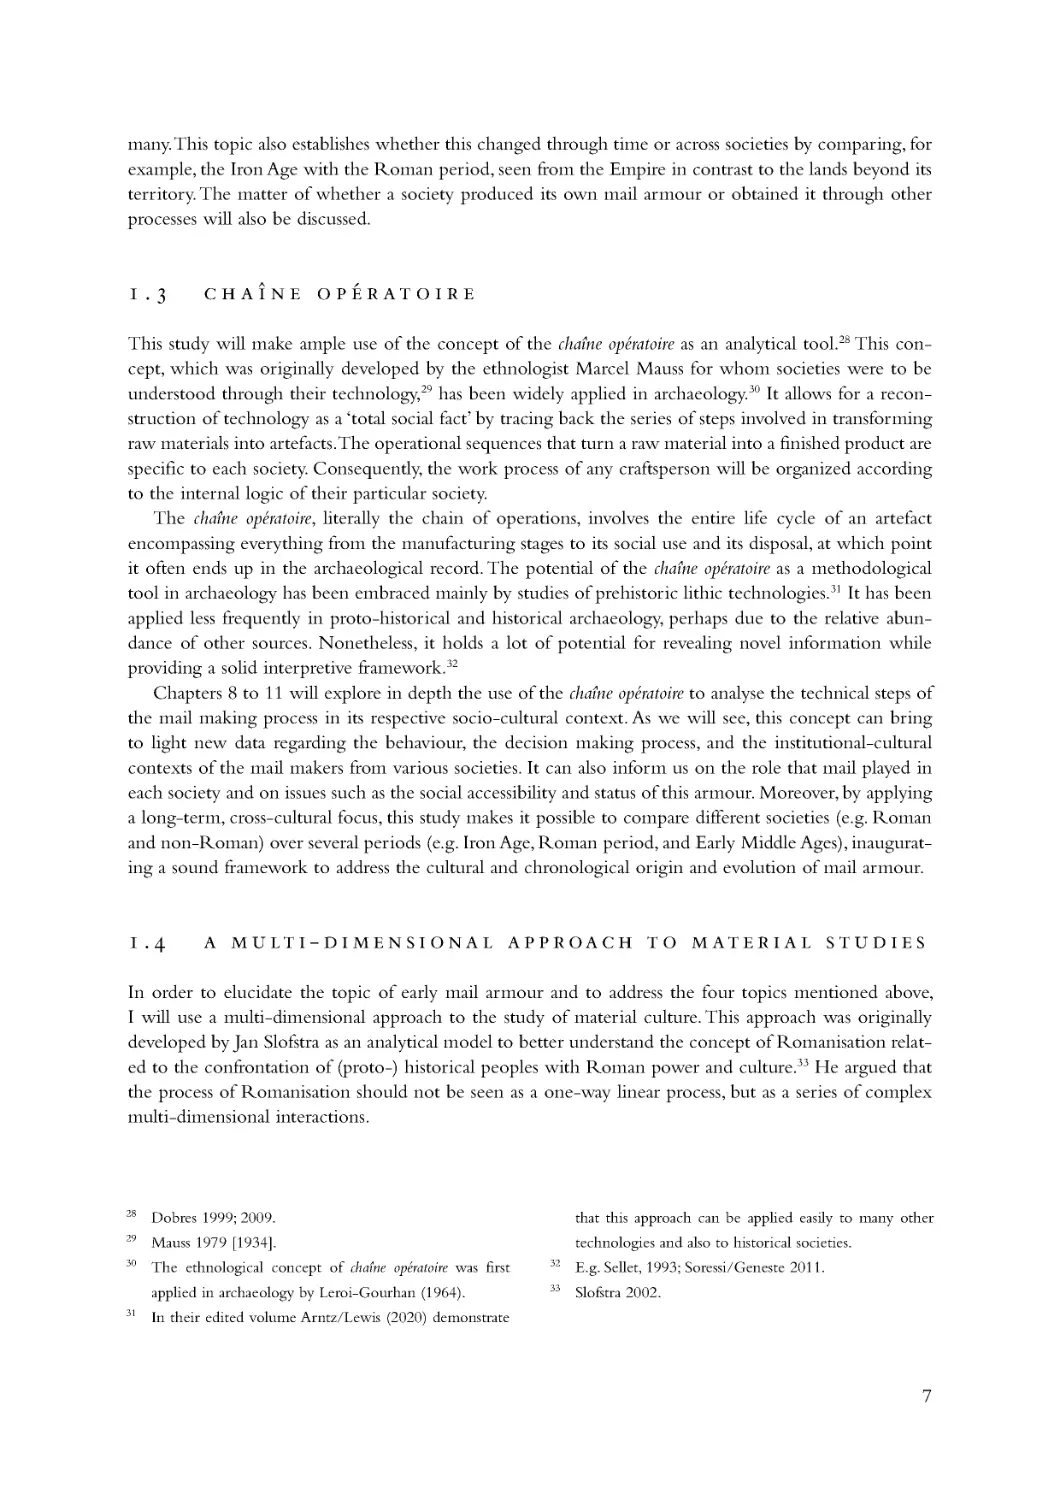 1.3 Chaine opératoire
1.4 A multi-dimensional approach to material studies